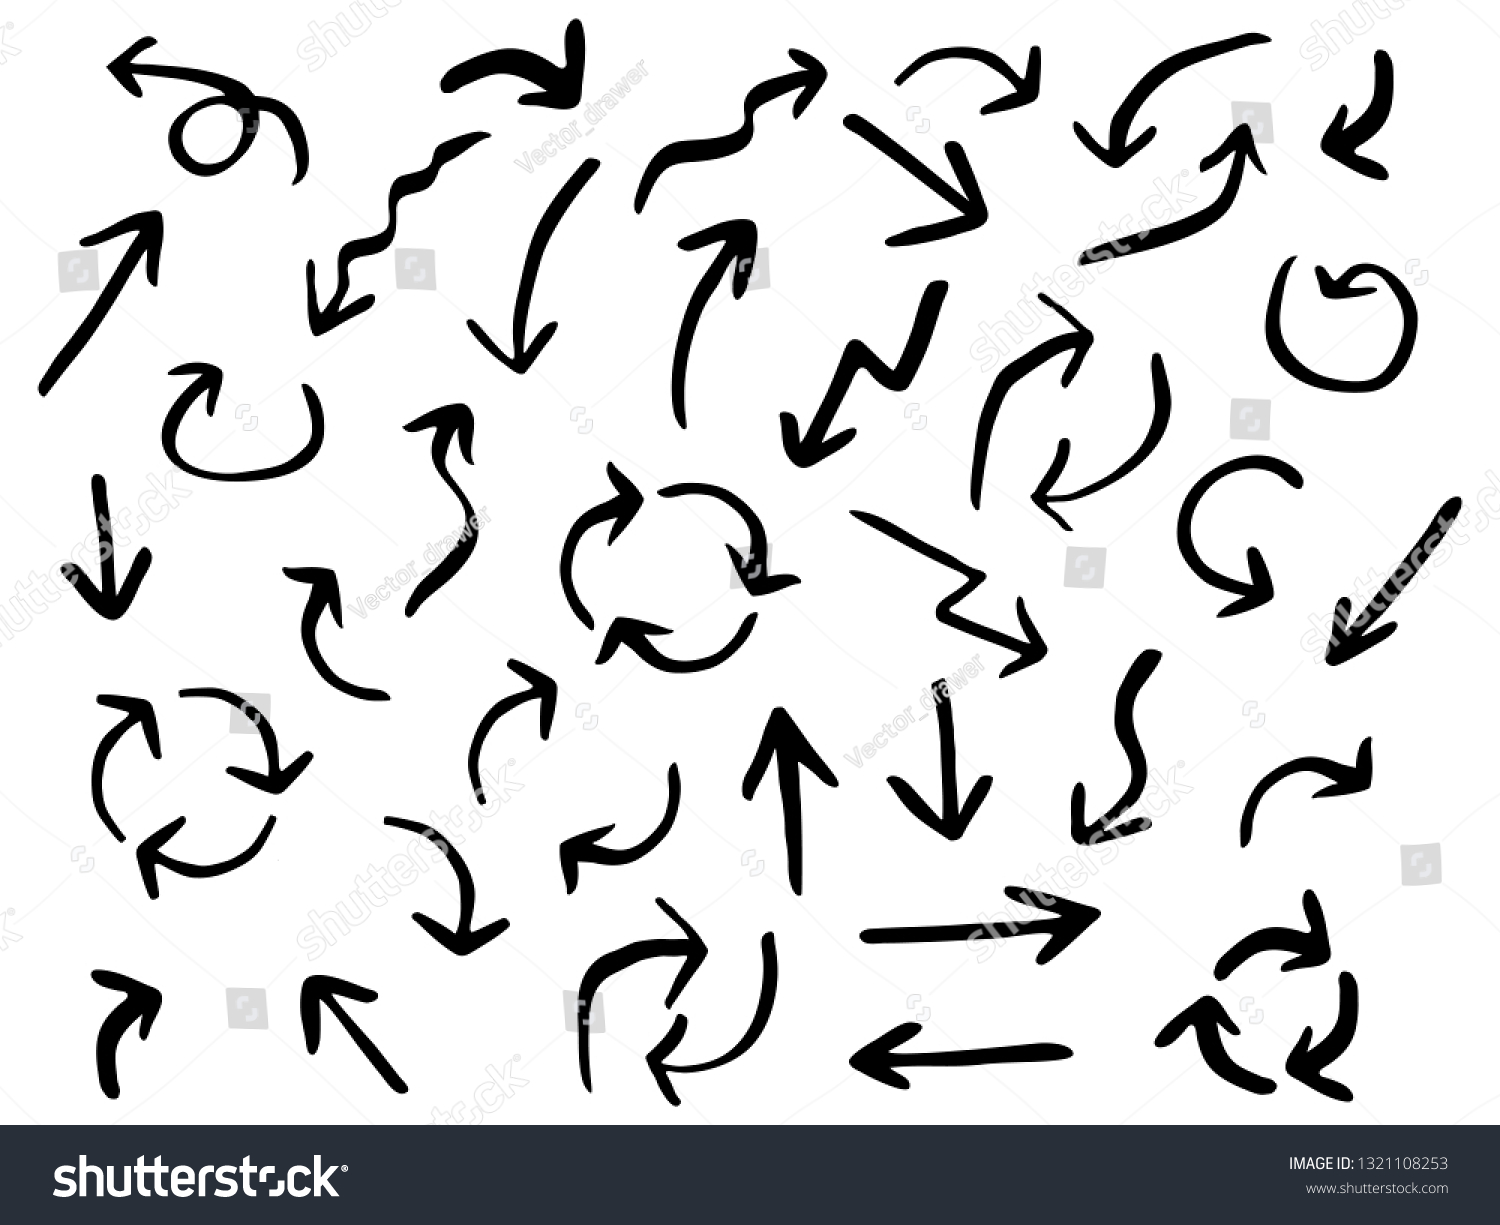 Isolated hand drawn set of black arrows on white background. Collection arrow design templates. Vector illustration. #1321108253